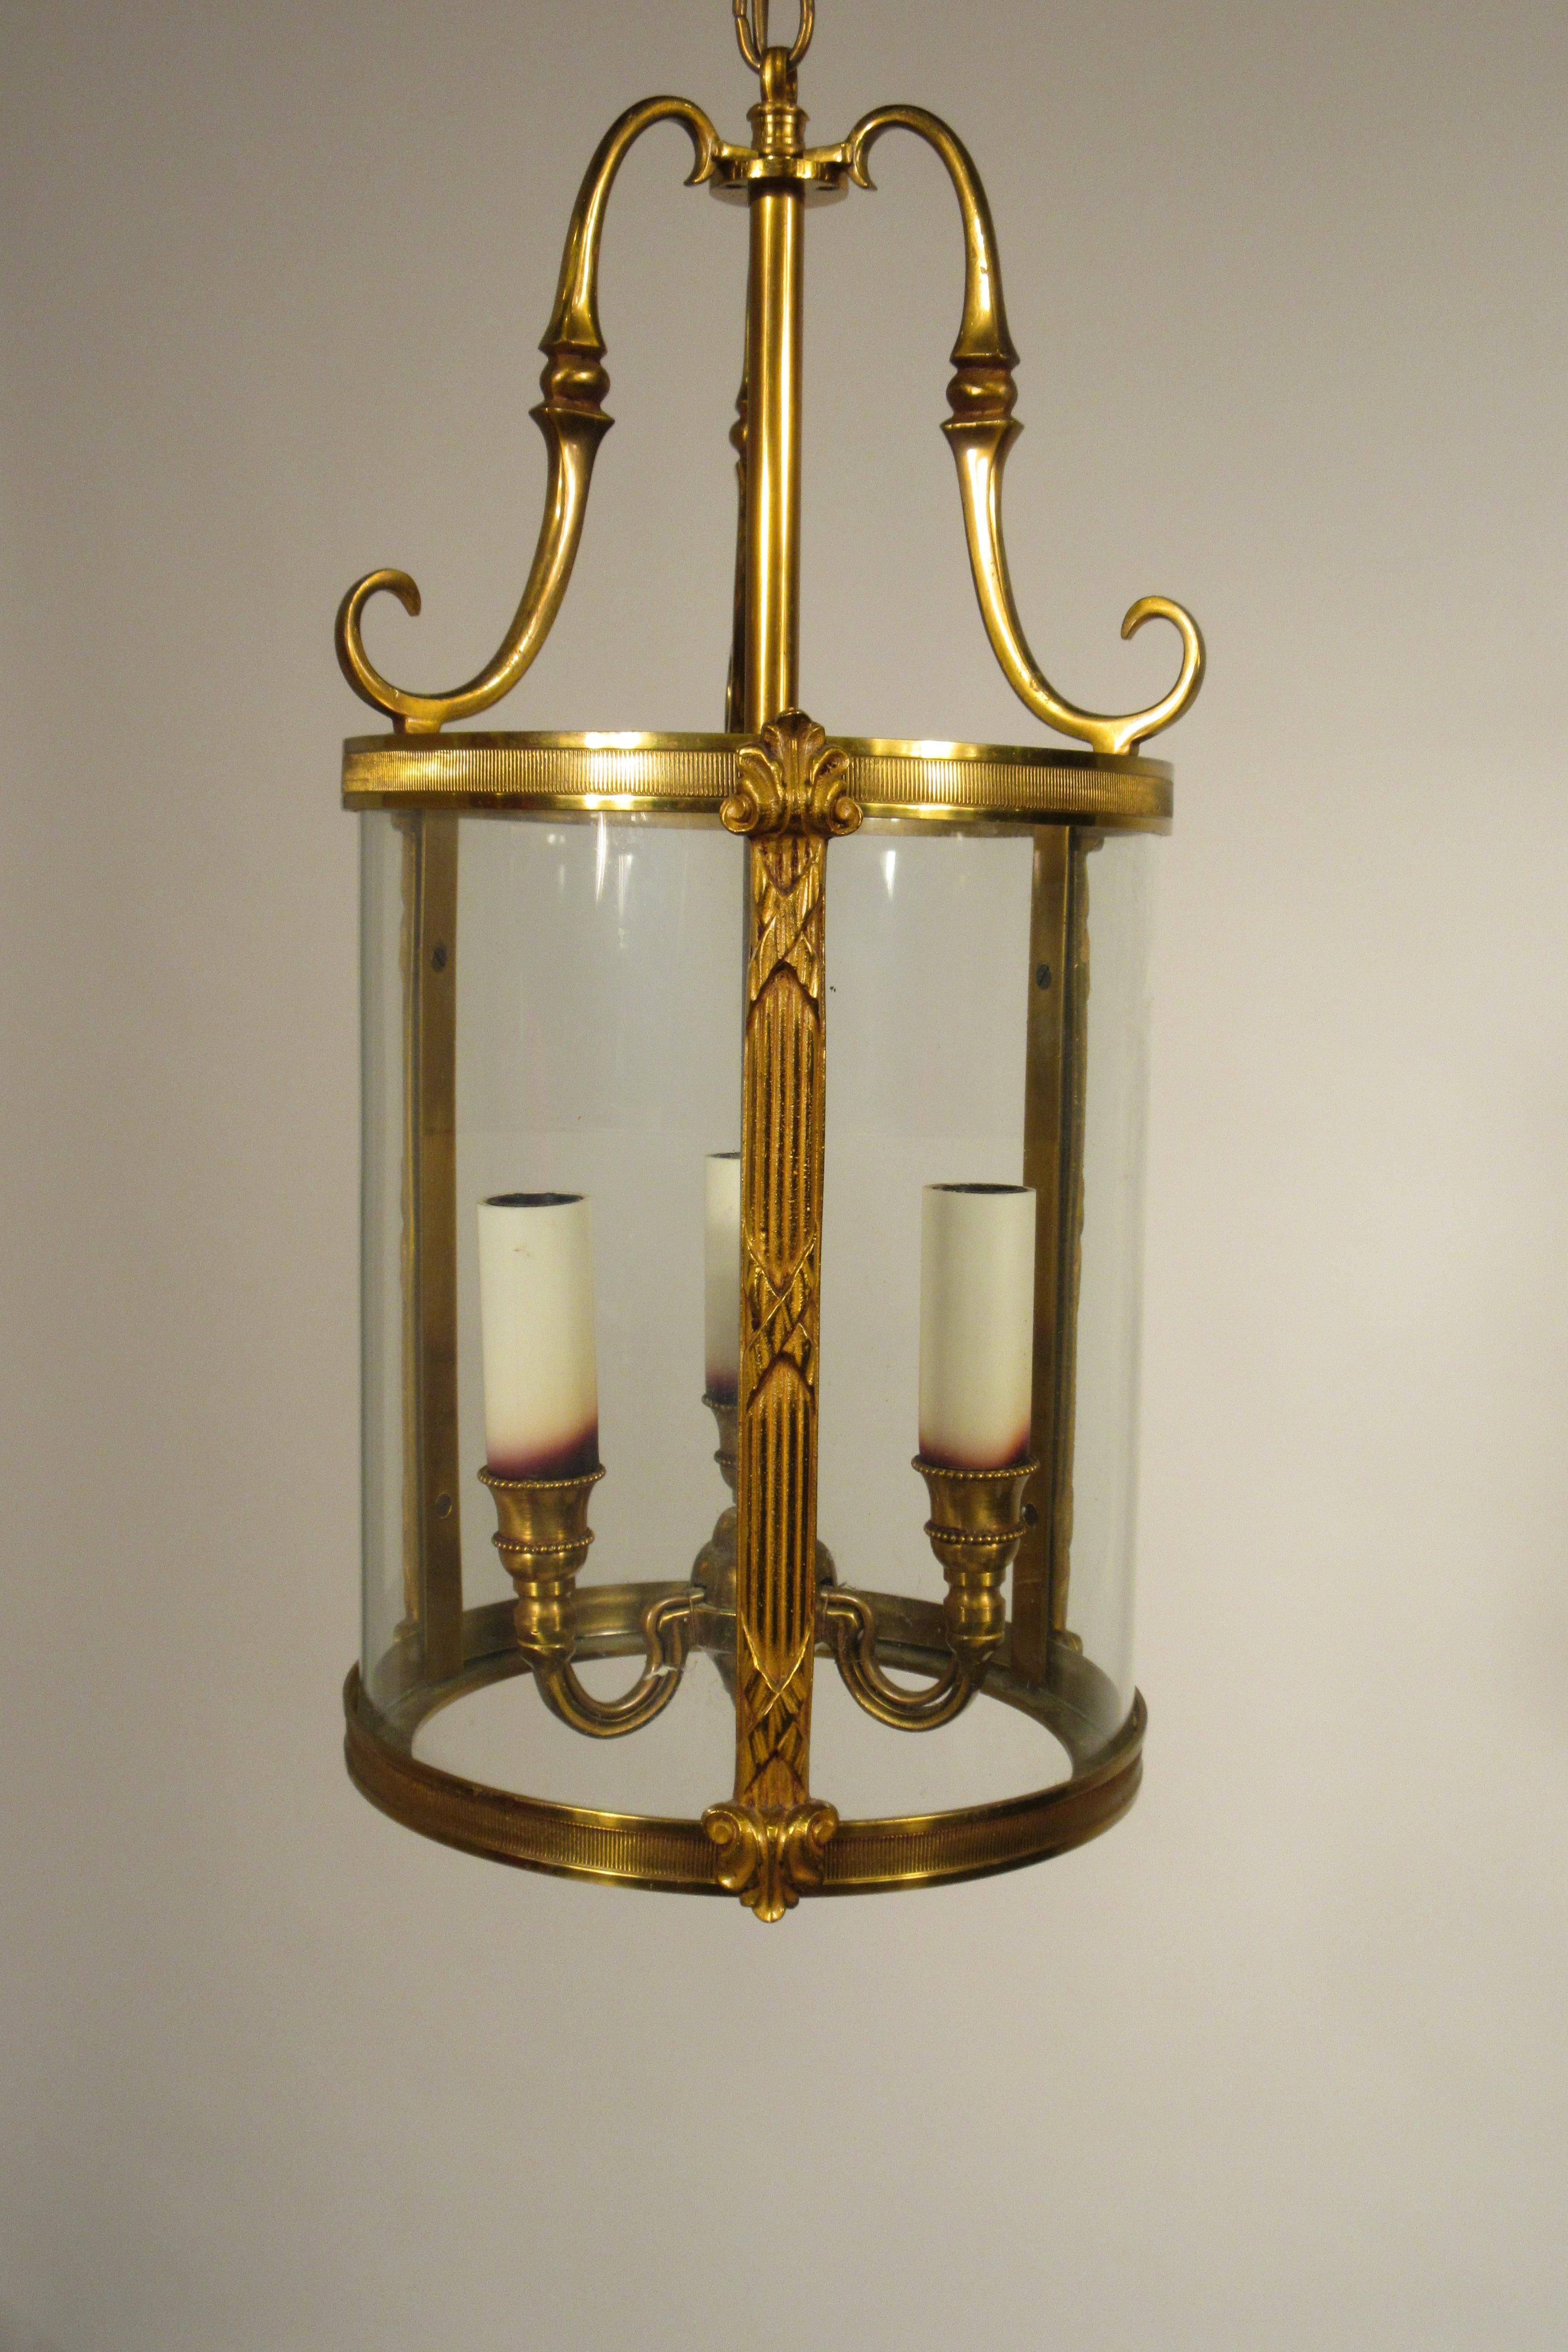 Brass classical small lantern from a Southampton estate.